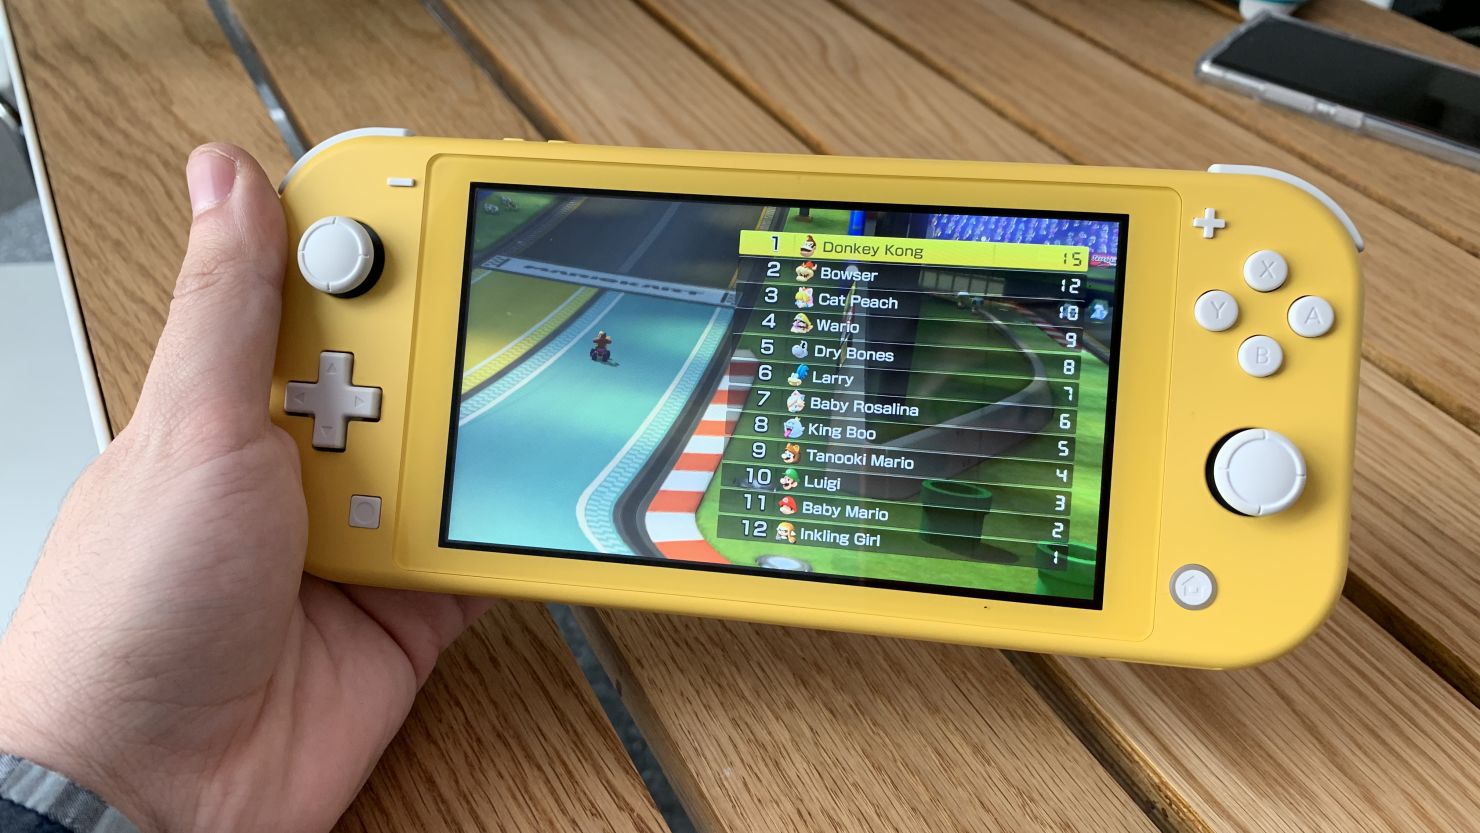 Nintendo Switch Lite Hands-on: An excellent handheld console that feels  great